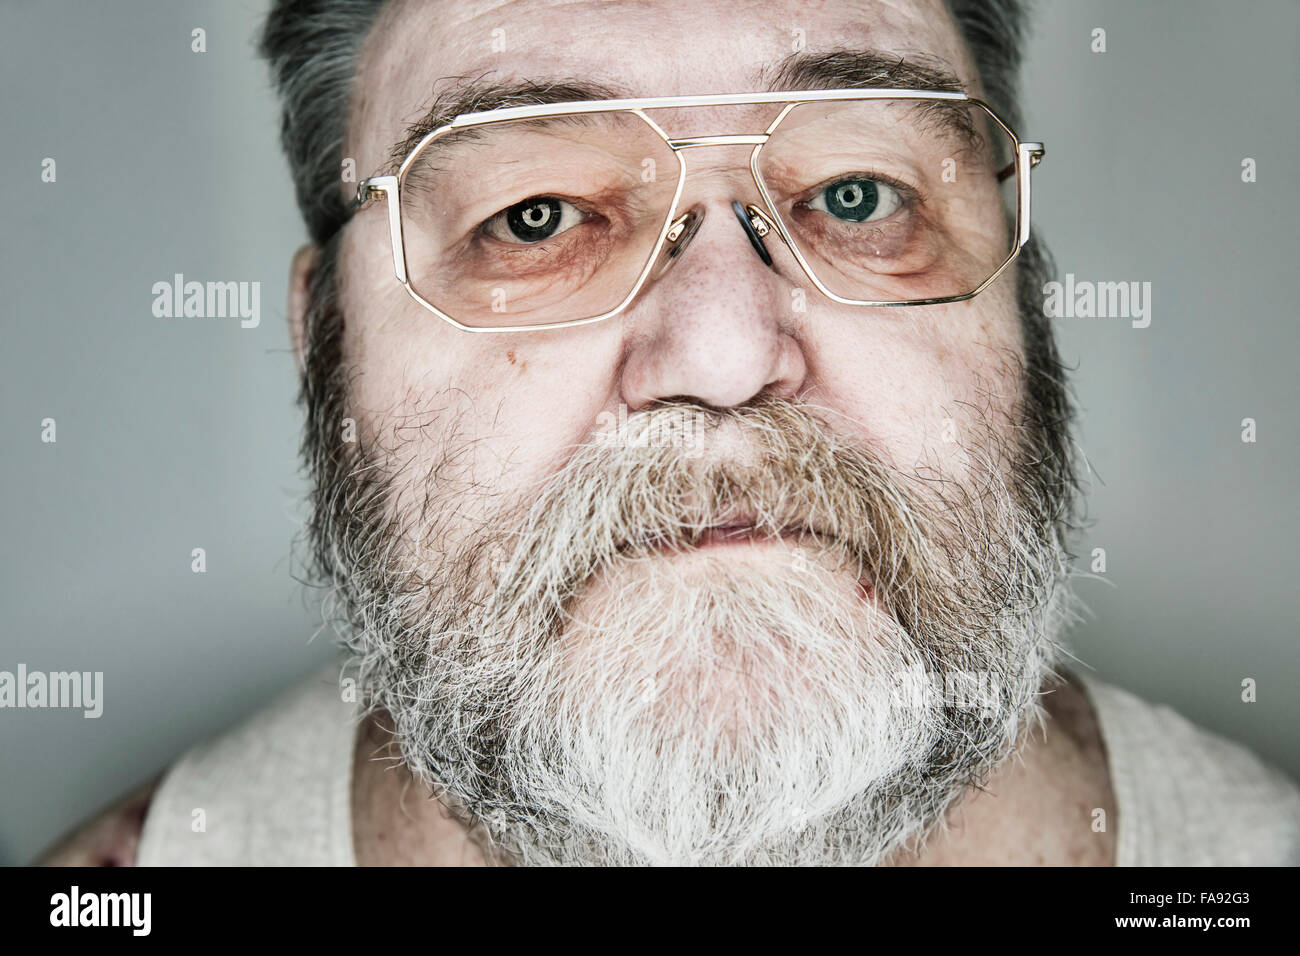 Senior with beard and glasses, portrait, Germany Stock Photo